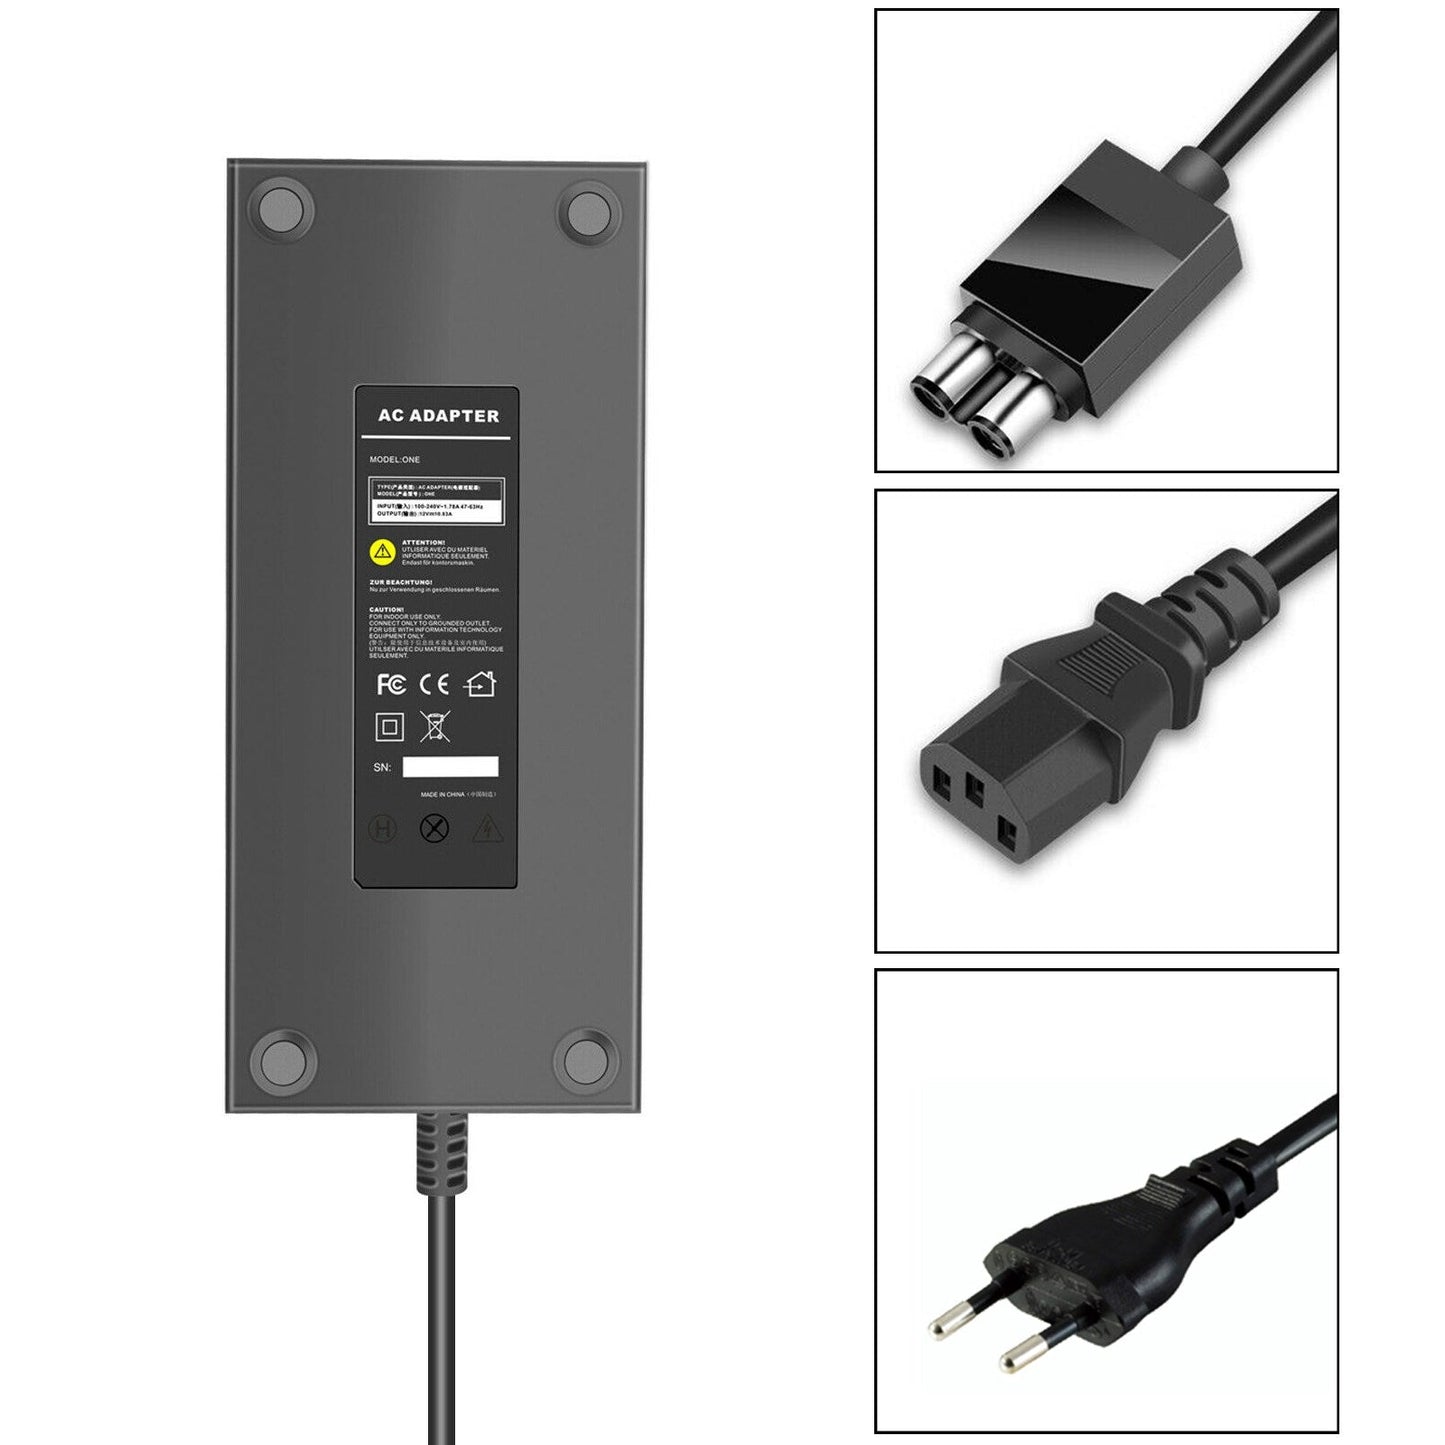 Power Supply AC Adapter 135W 10.83A Power Cord Cable Fit for Xbox one Console EU